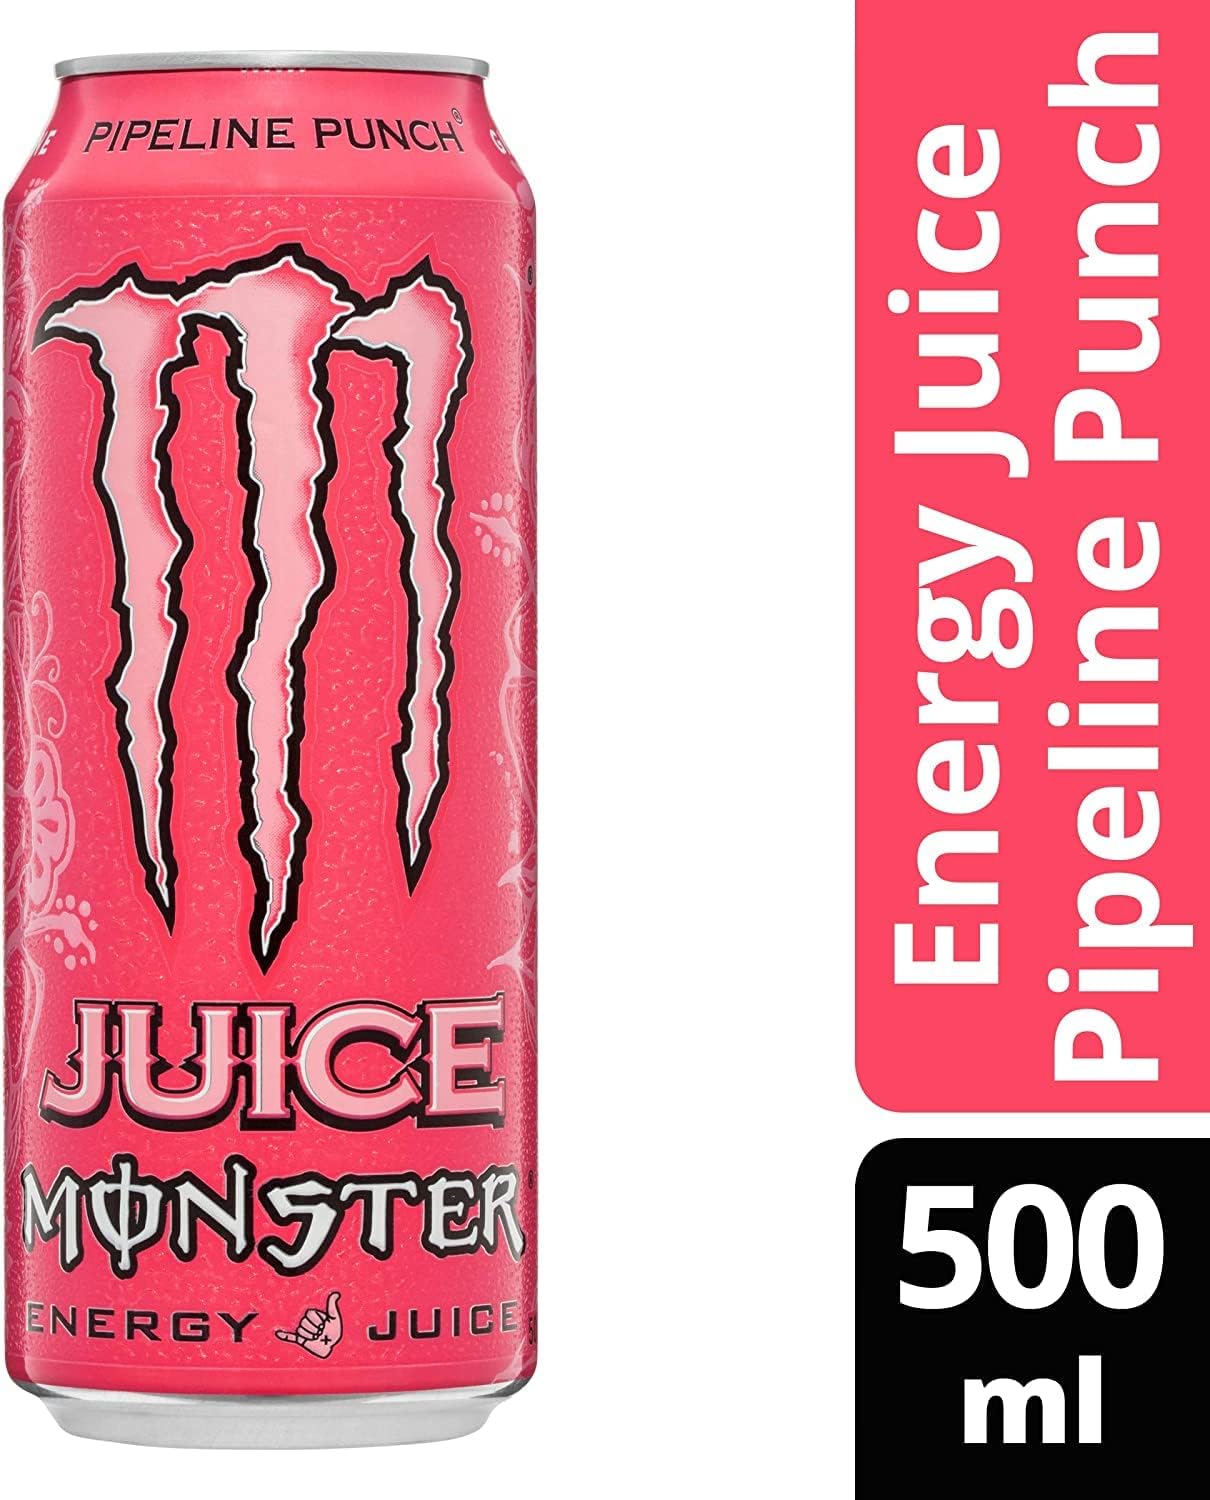 Monster Energy Drink Pipeline Punch Cans, 24 x 500ml